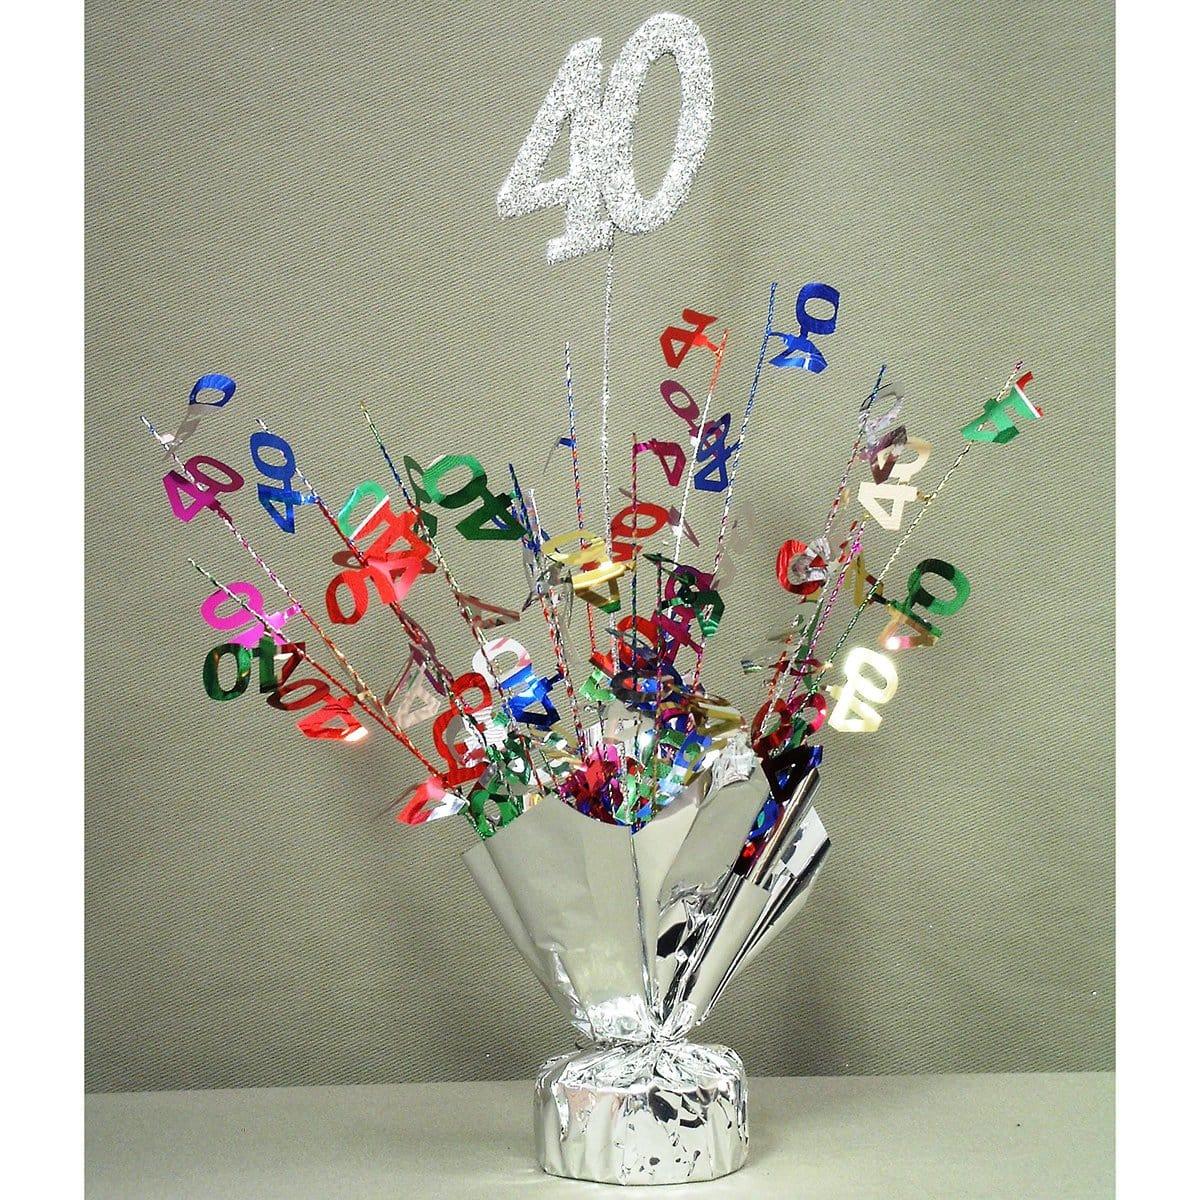 Buy Balloons #40 Silver Balloon Weight / Centerpiece sold at Party Expert